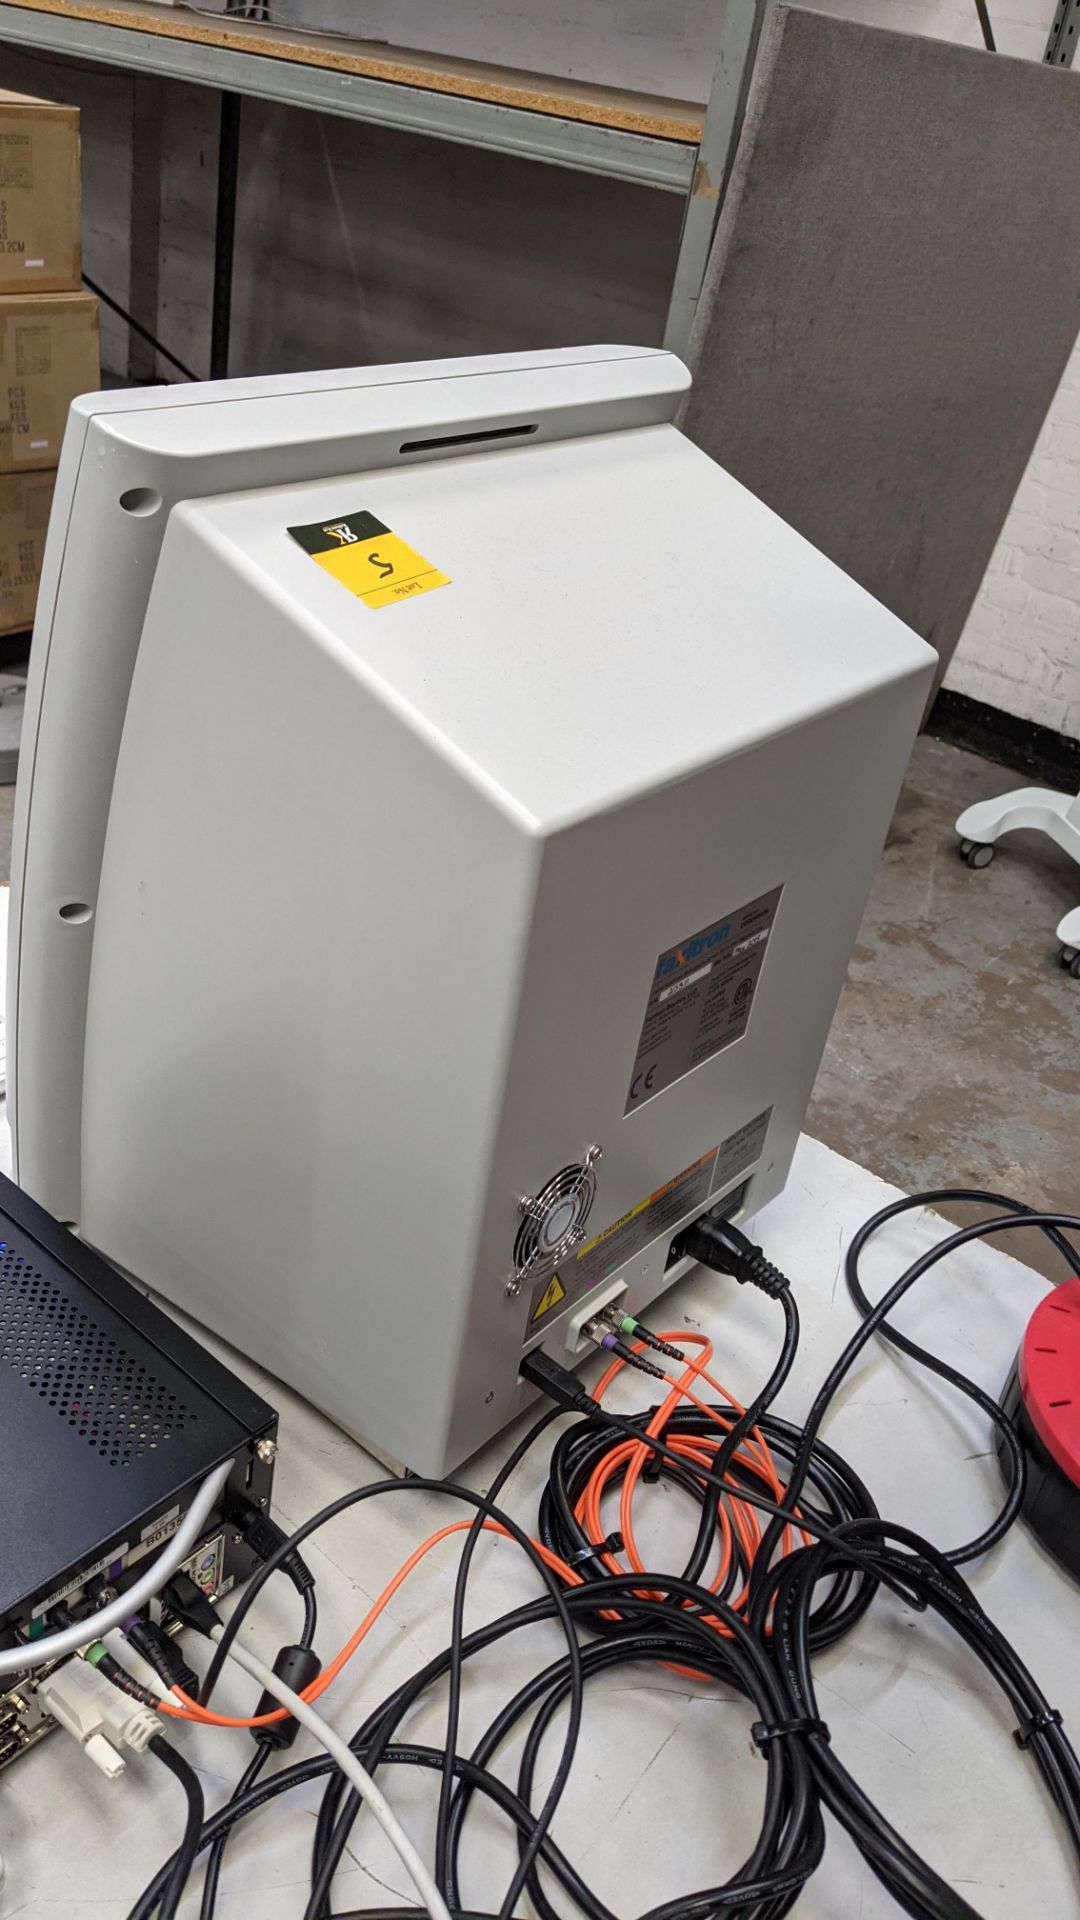 Faxitron CoreVision digital specimen system, purchased new in 2015. - Image 14 of 24